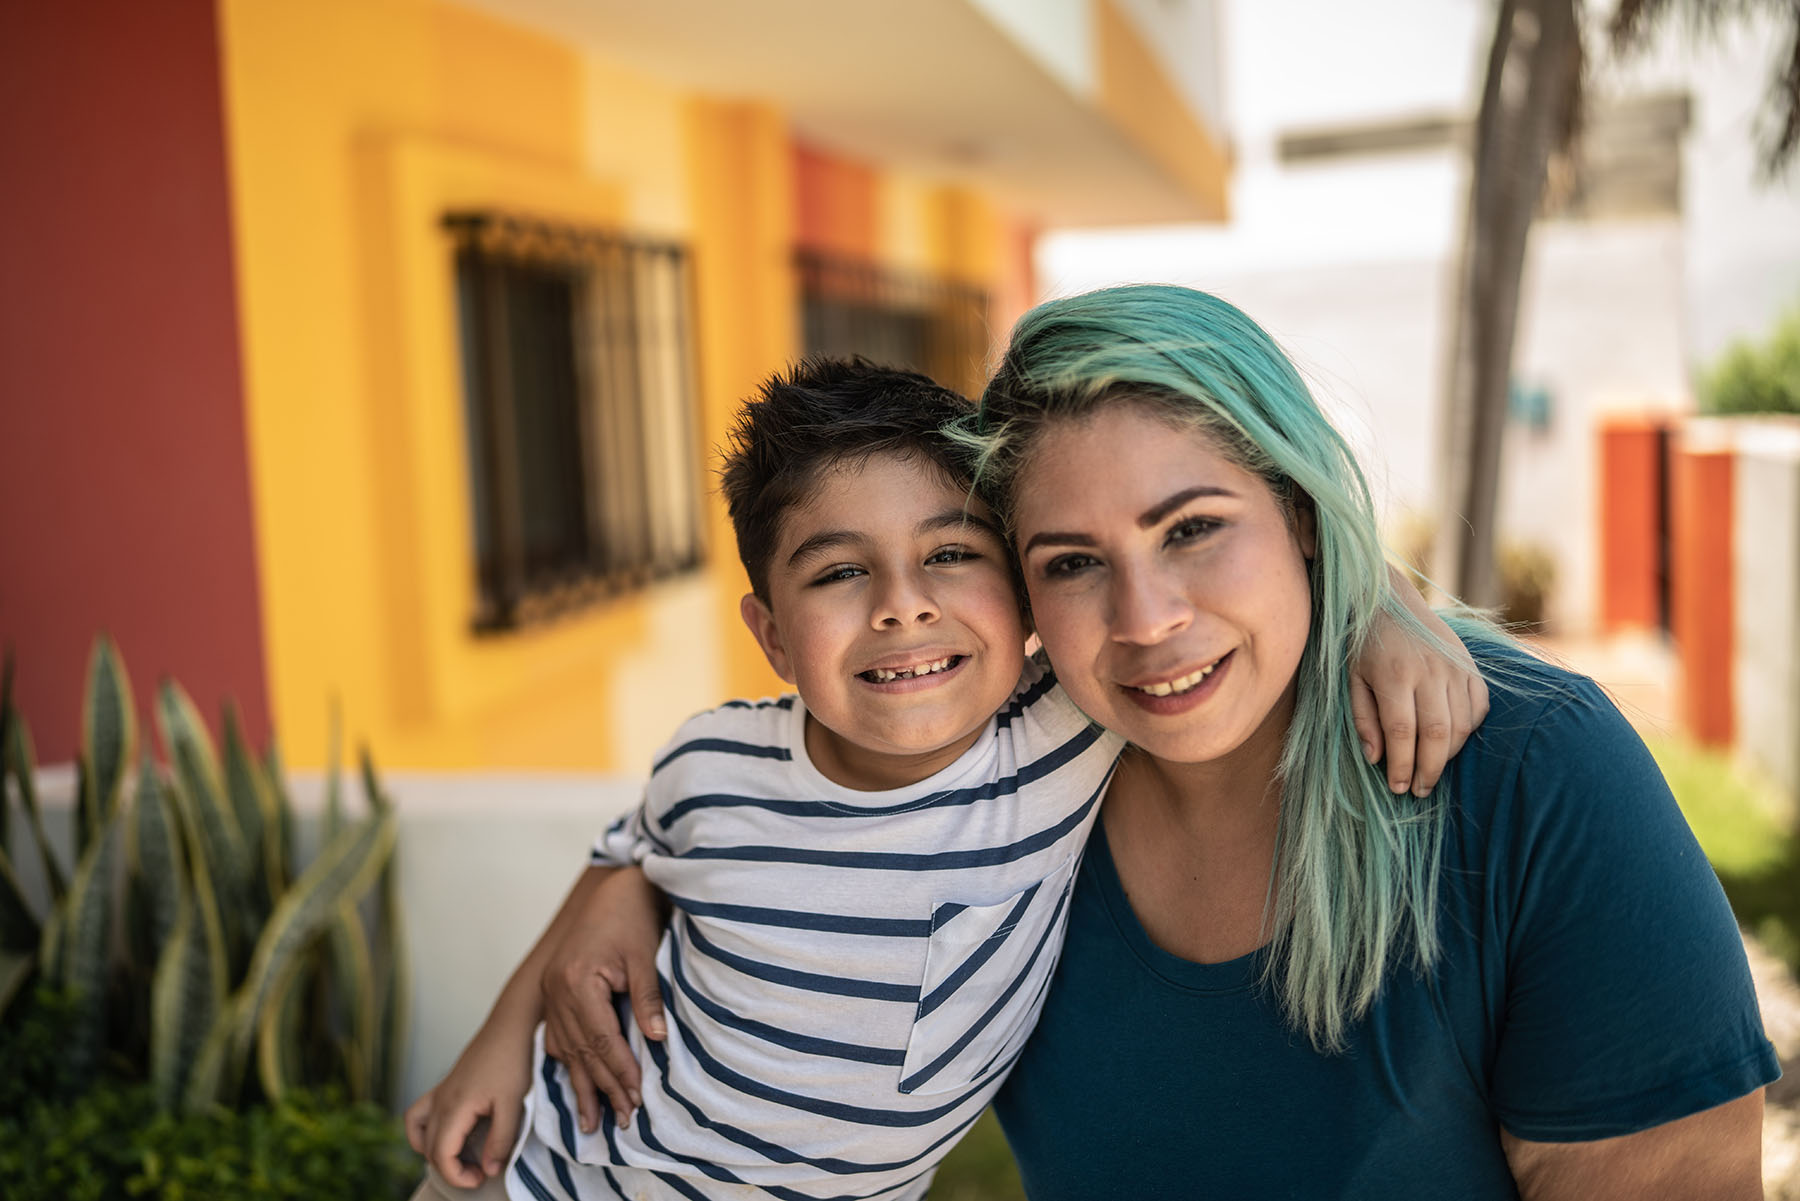 Hispanic mother with hair dyed green smiles with her son outside a house.